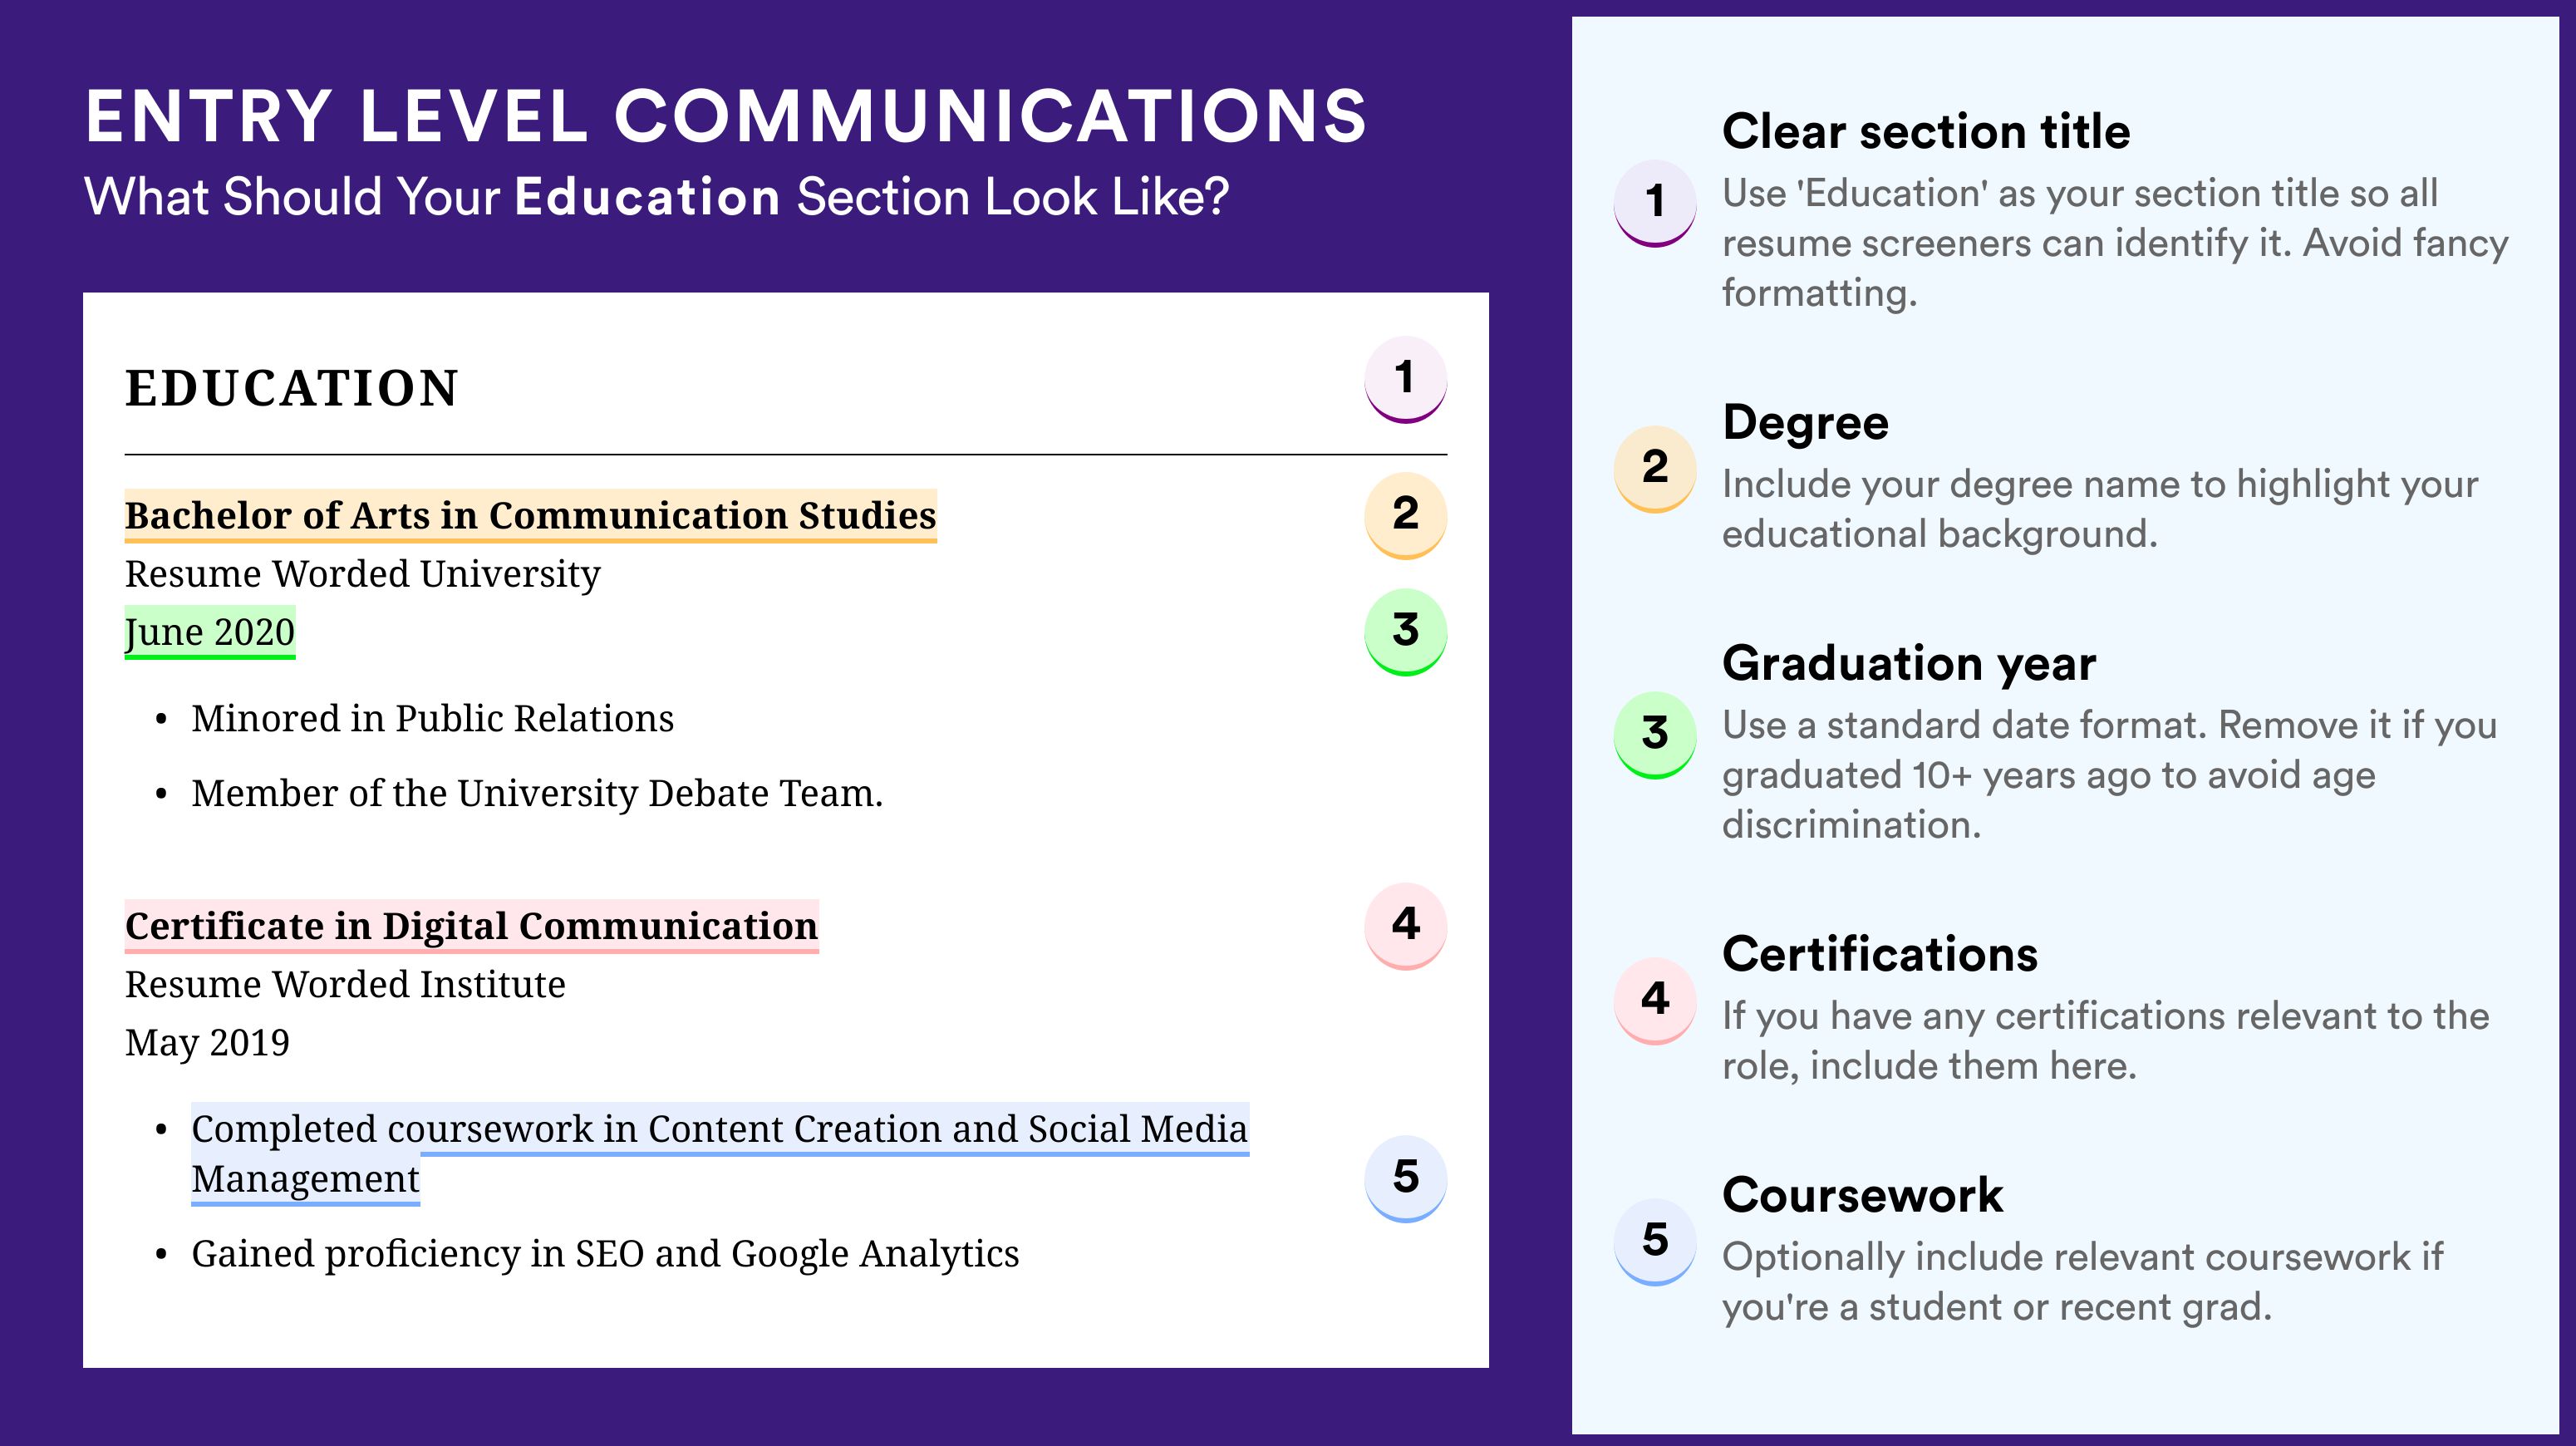 How To Write An Education Section - Entry Level Communications Roles